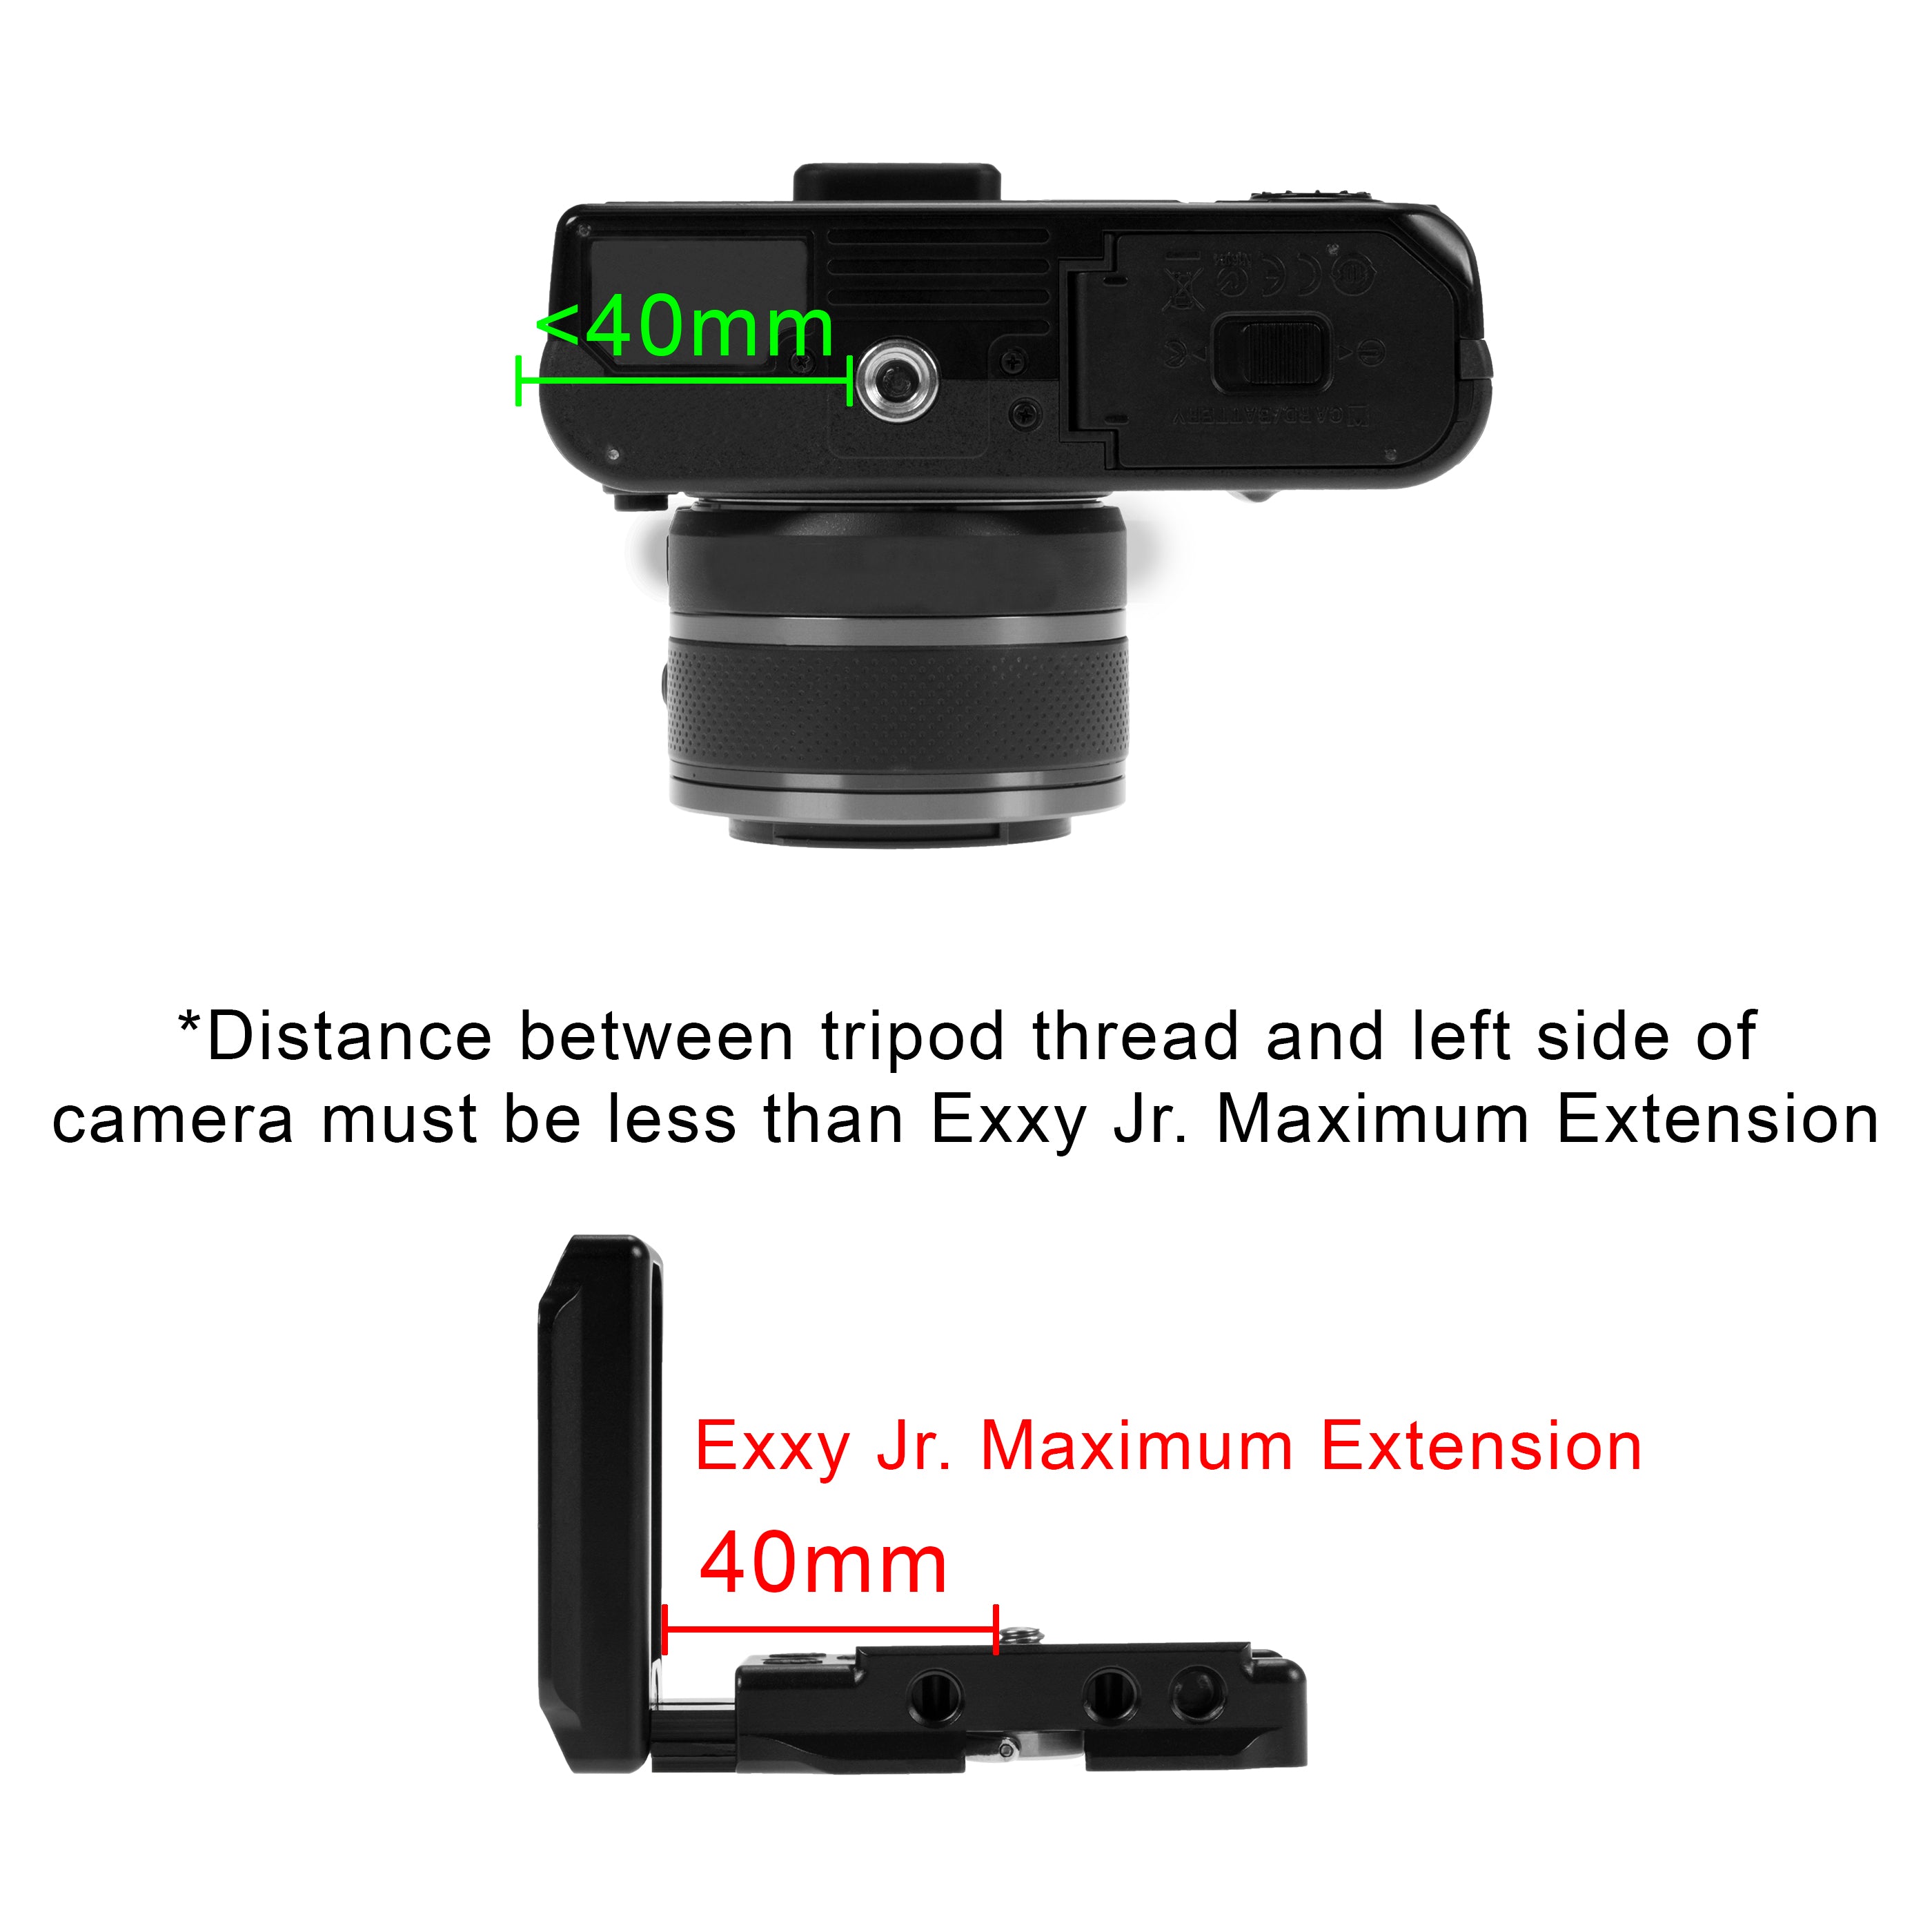 Exxy Omni Jr. Universal L-Bracket for Most Smaller MILCs from Fotodiox Pro - All Metal Camera Grip for Arca Swiss-Type Quick Releases